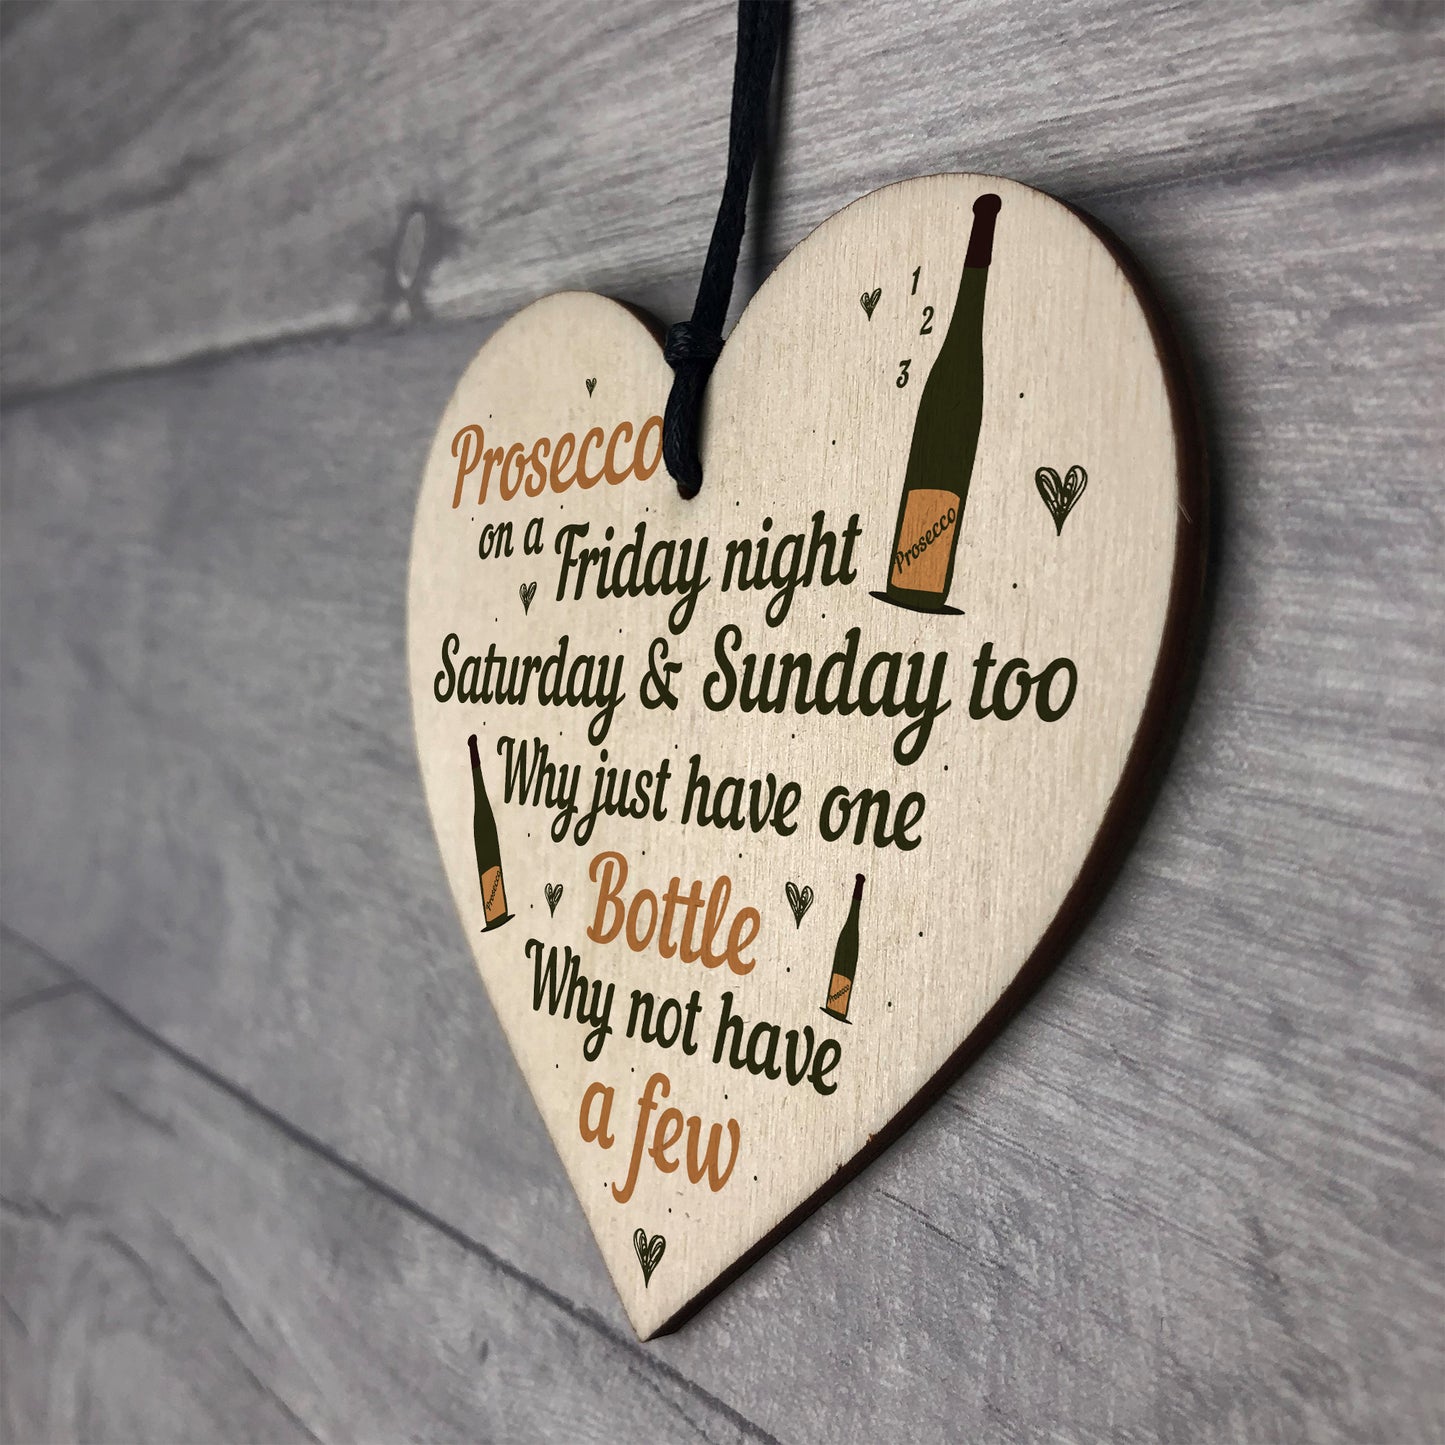 Friday Night Prosecco Wood Heart Funny Drinking Bar Plaque Gift